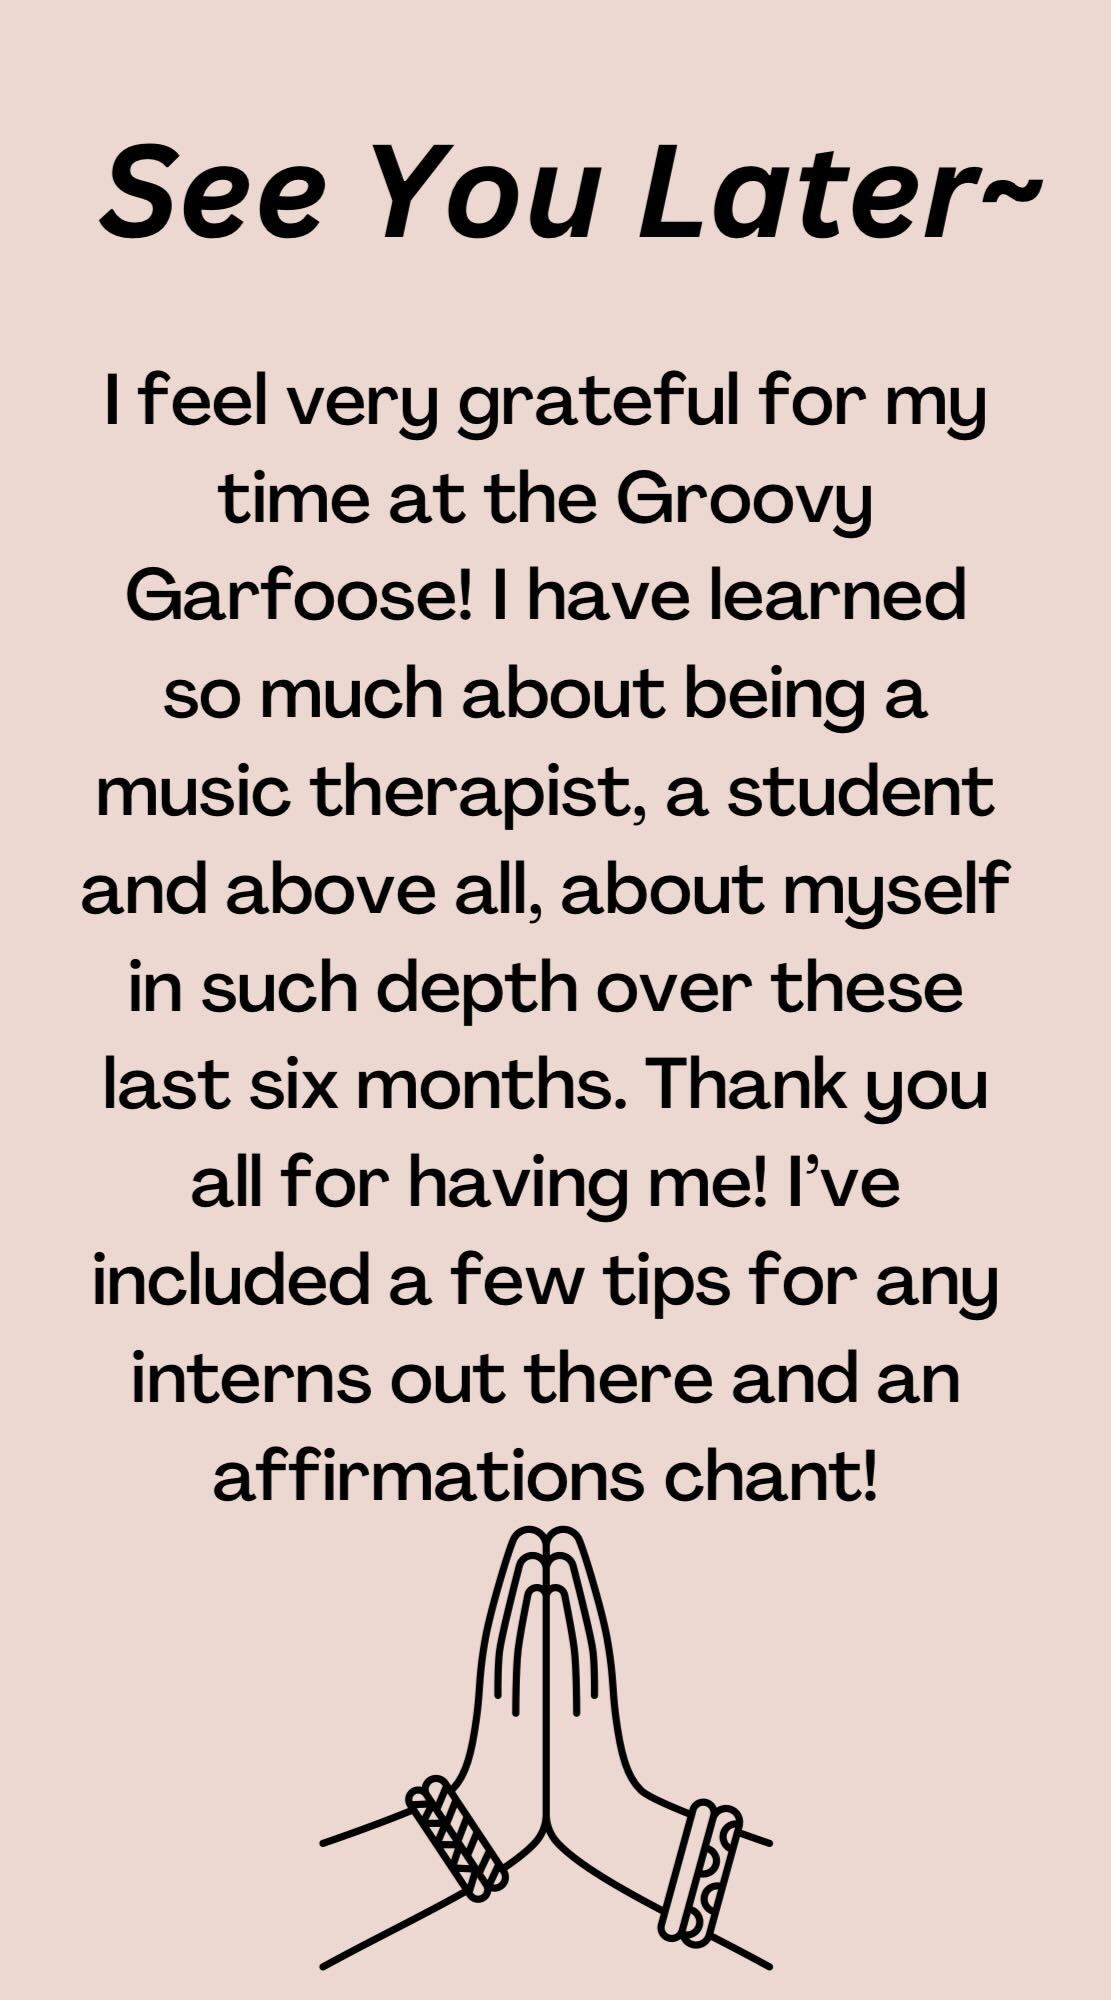 A pink background with black text overlay and hands folded in gratitude.The text reads: “See you later. I feel very grateful for my time at the Groovy Garfoose! I have learned so much about being a music therapist, a student and above all, myself in so much depth over these last six months. Thank you all for having me! I’ve included a few tips for any interns out there and an affirmation chant!”